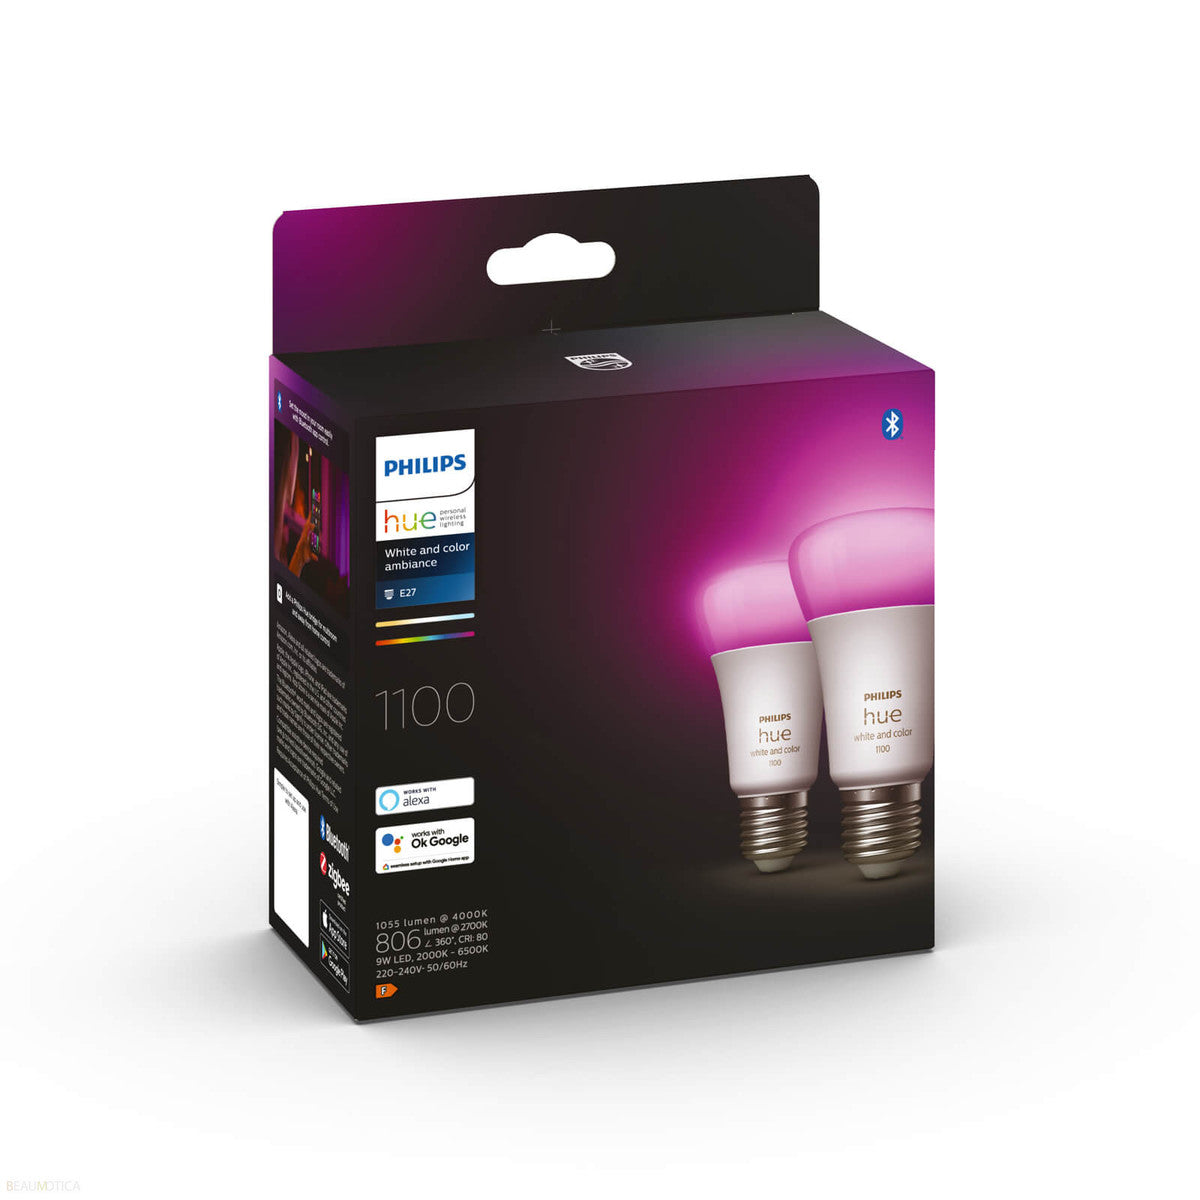 Philips HueWCA Hue standaardlamp E27 - White and Color Ambiance - 2-pack